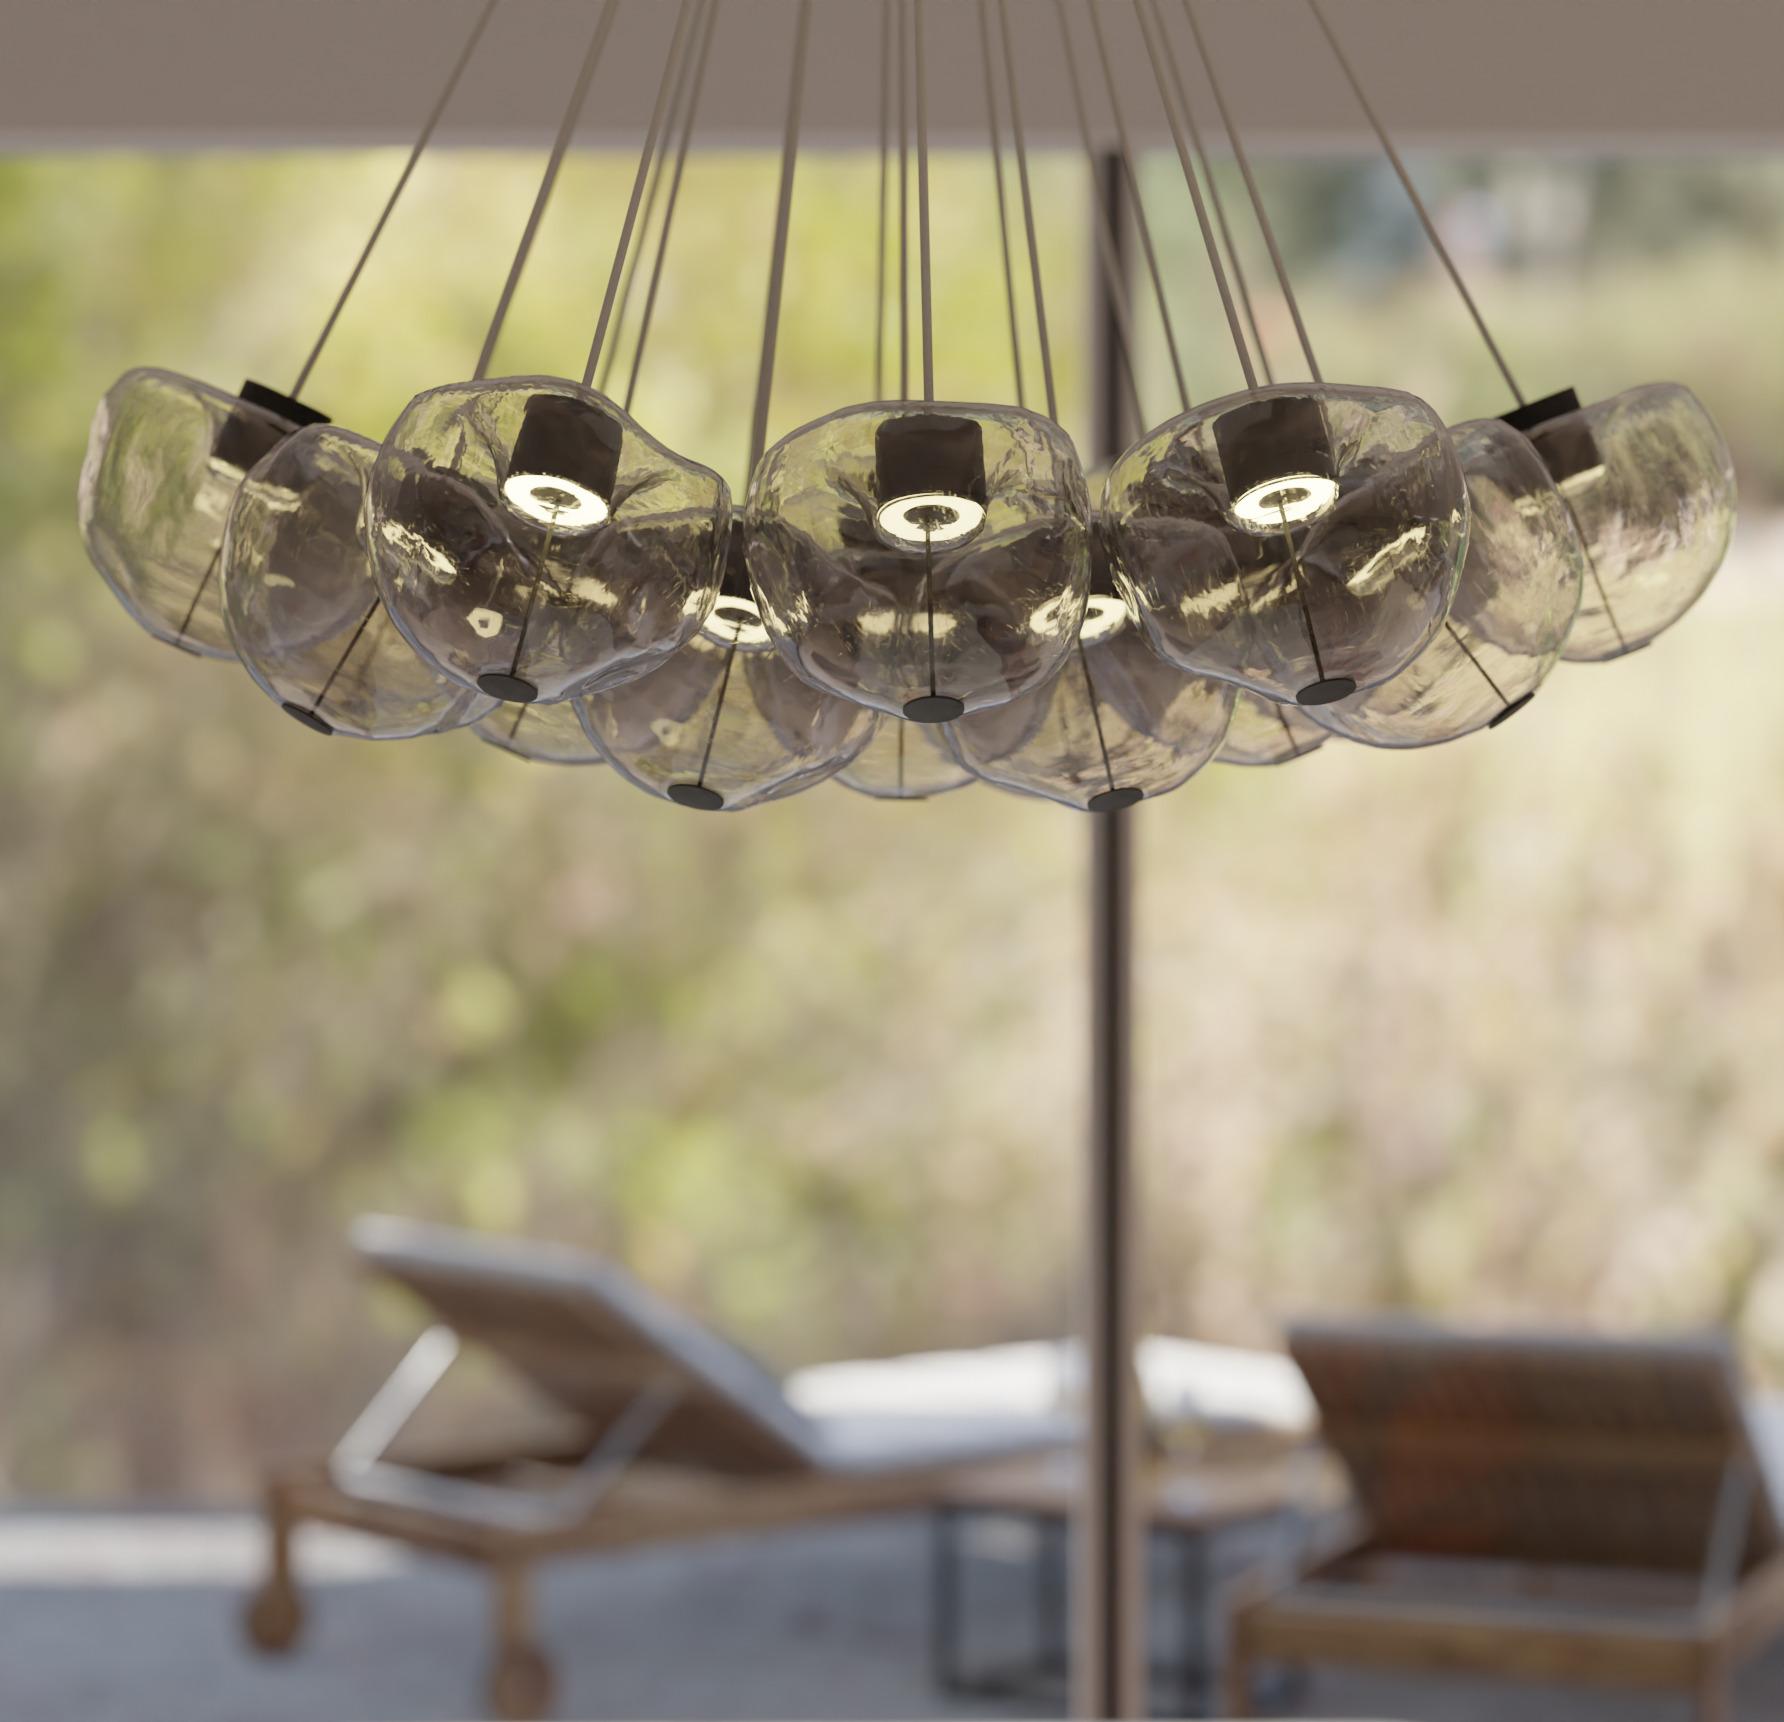 Modern 19 lights artistic Murano glass chandelier with amorphous glass spheres For Sale